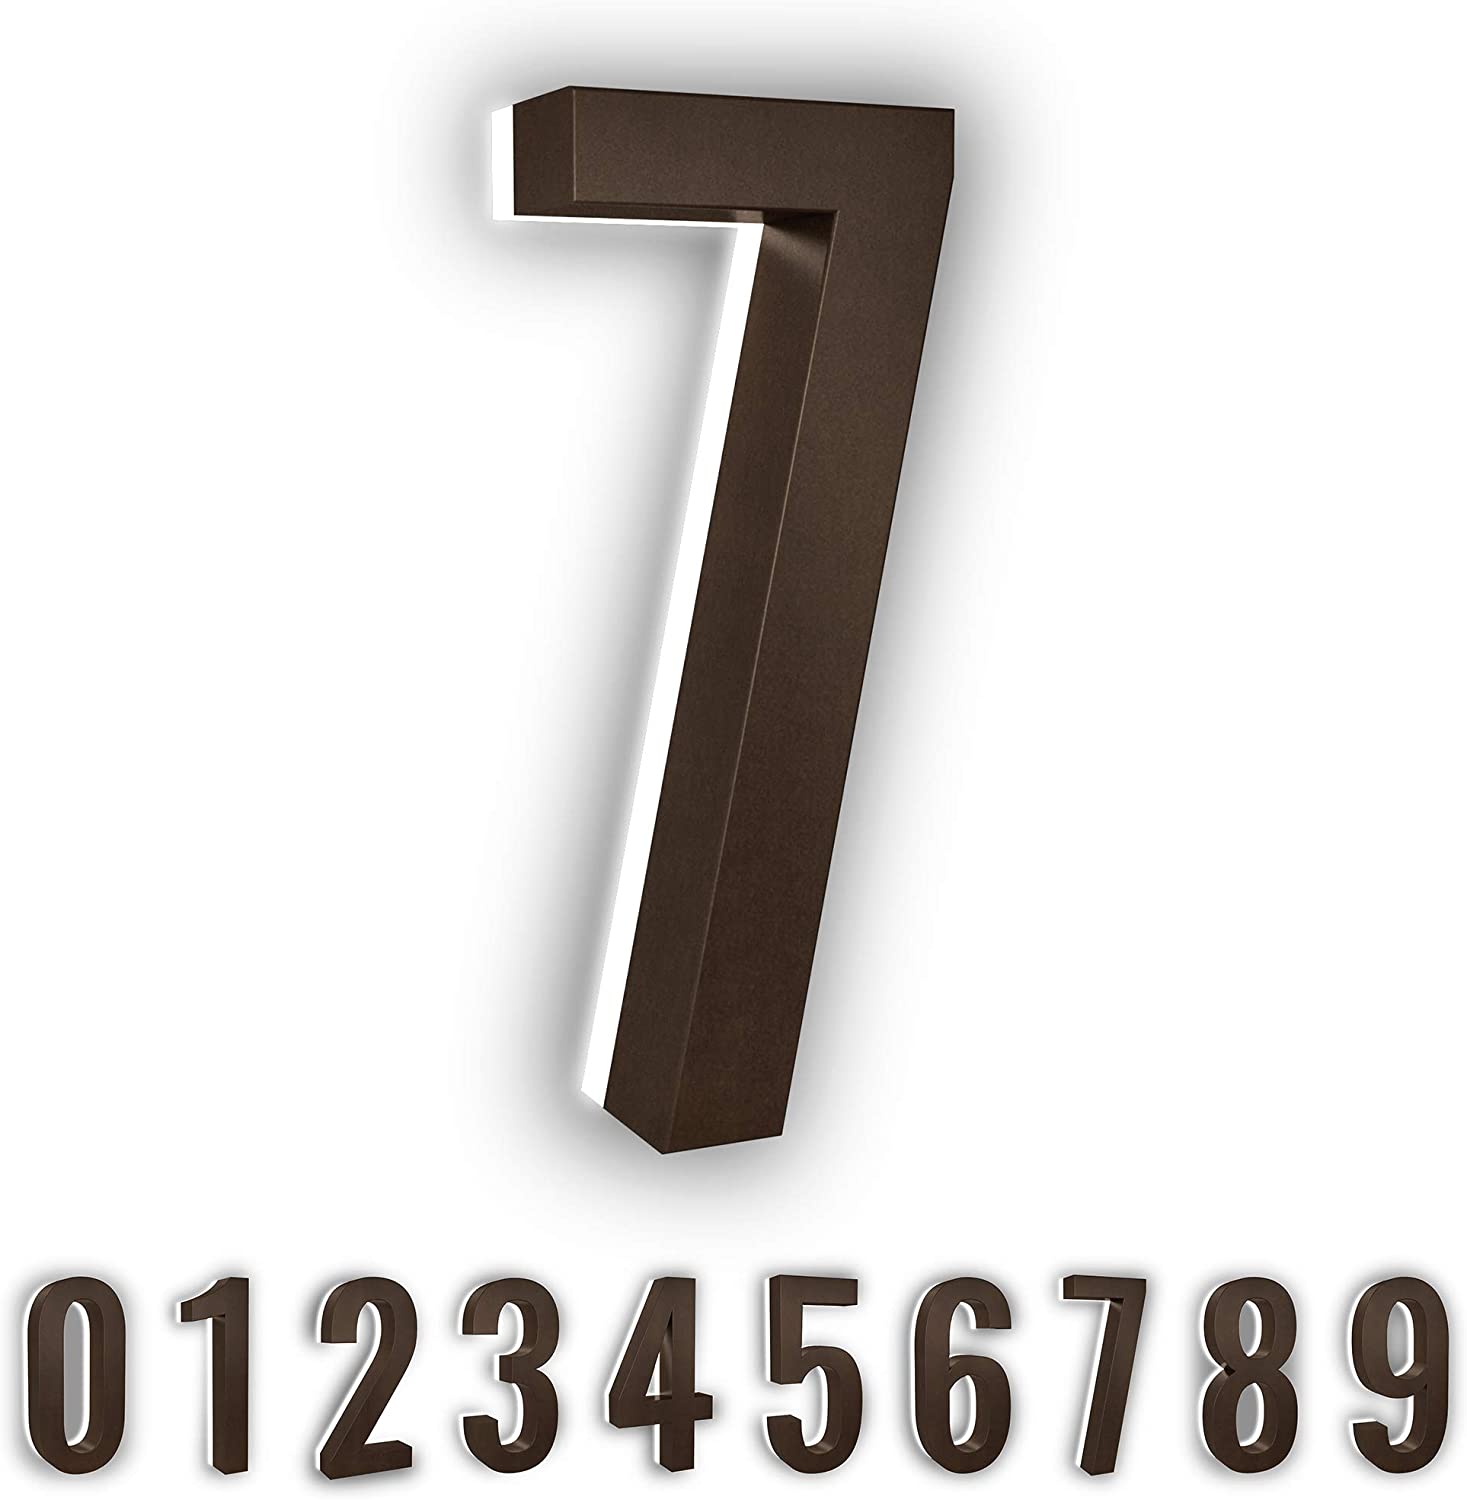 LumaNumbers Low-Voltage LED Address Numbers, Durable ABS-Polymer Lighted House Numbers, 5-inch, Weather-Proof, Illuminated (Bronze, 7) Power Source Required, Back-plate Recommended - image 1 of 5